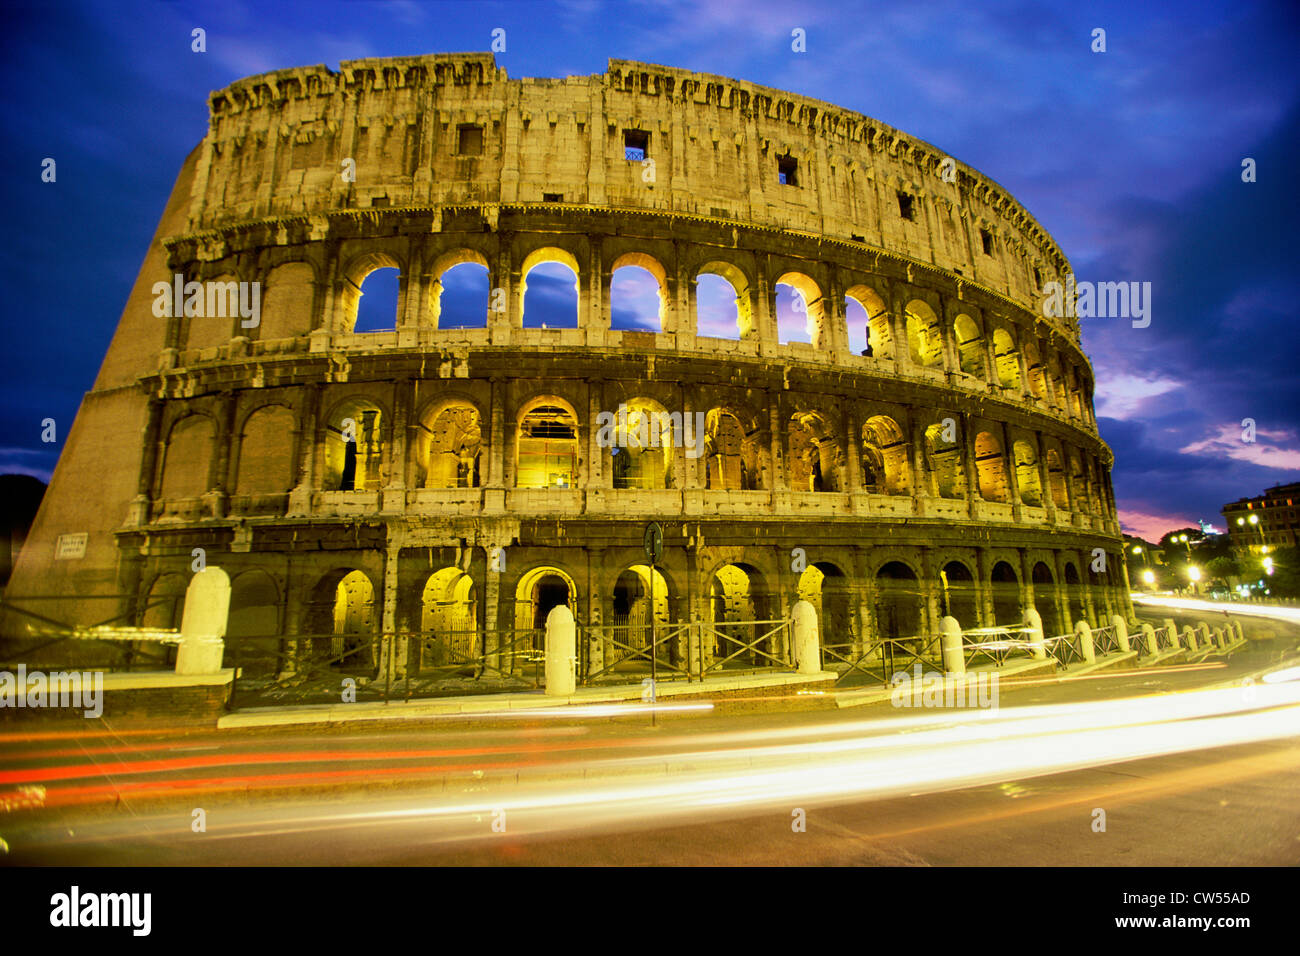 Low angle view of the old ruins of an amphitheater lit up at dusk, Colosseum, Rome, Italy Stock Photo